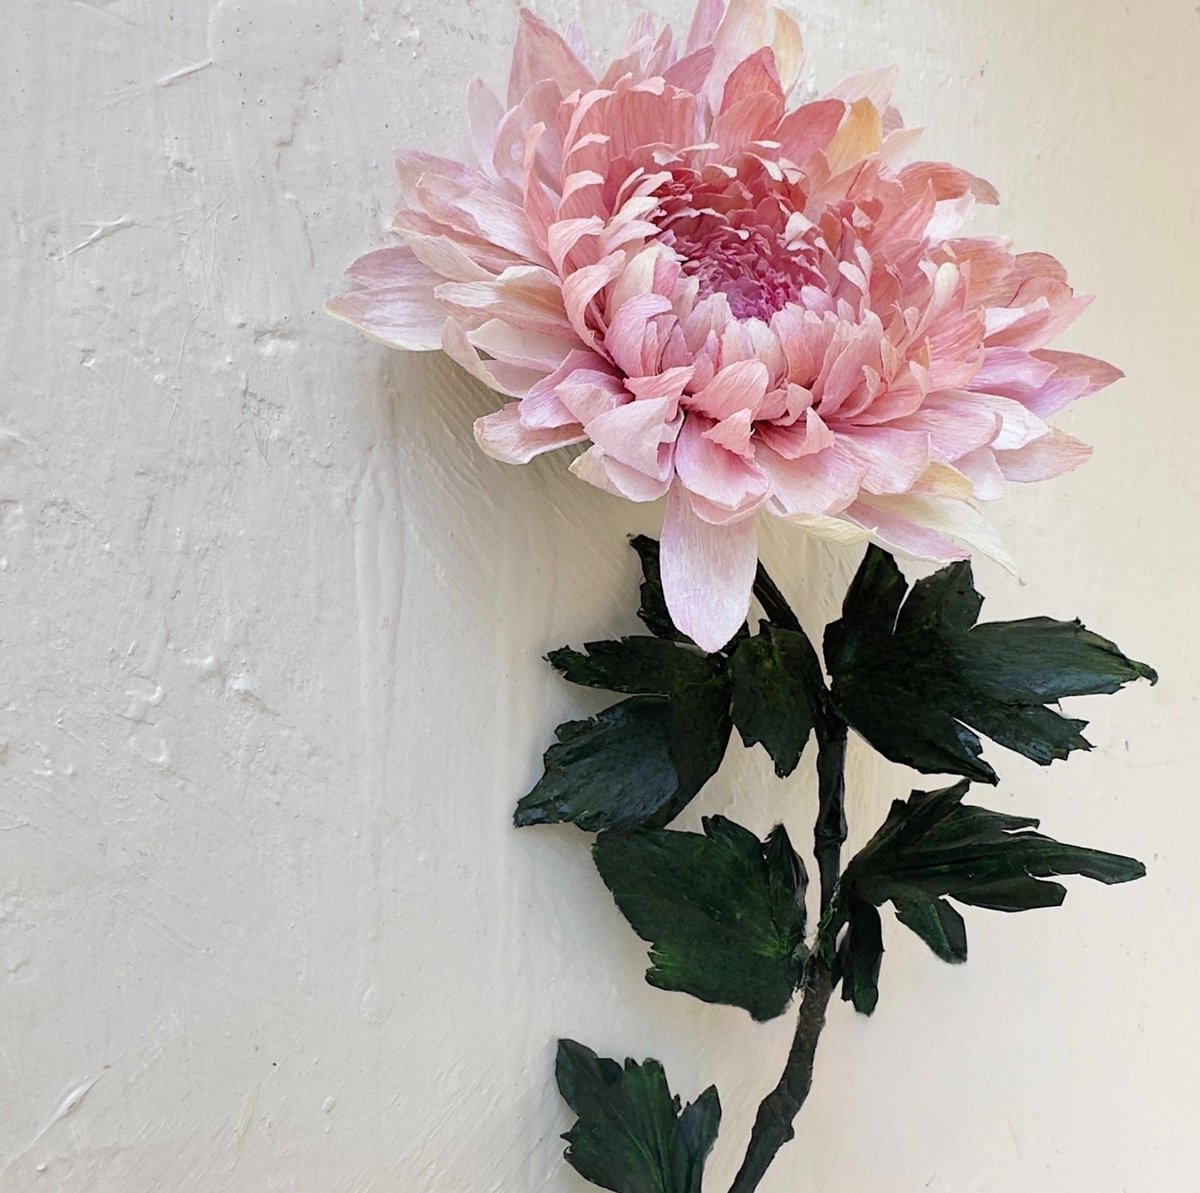 TheProcess: After a DECADE of trial and error, this is how I work to create my IRL botanical sculptures, #Crysanthemum #PaperBotany #PaperFlowers #PaperFlowersTutorial #MYART